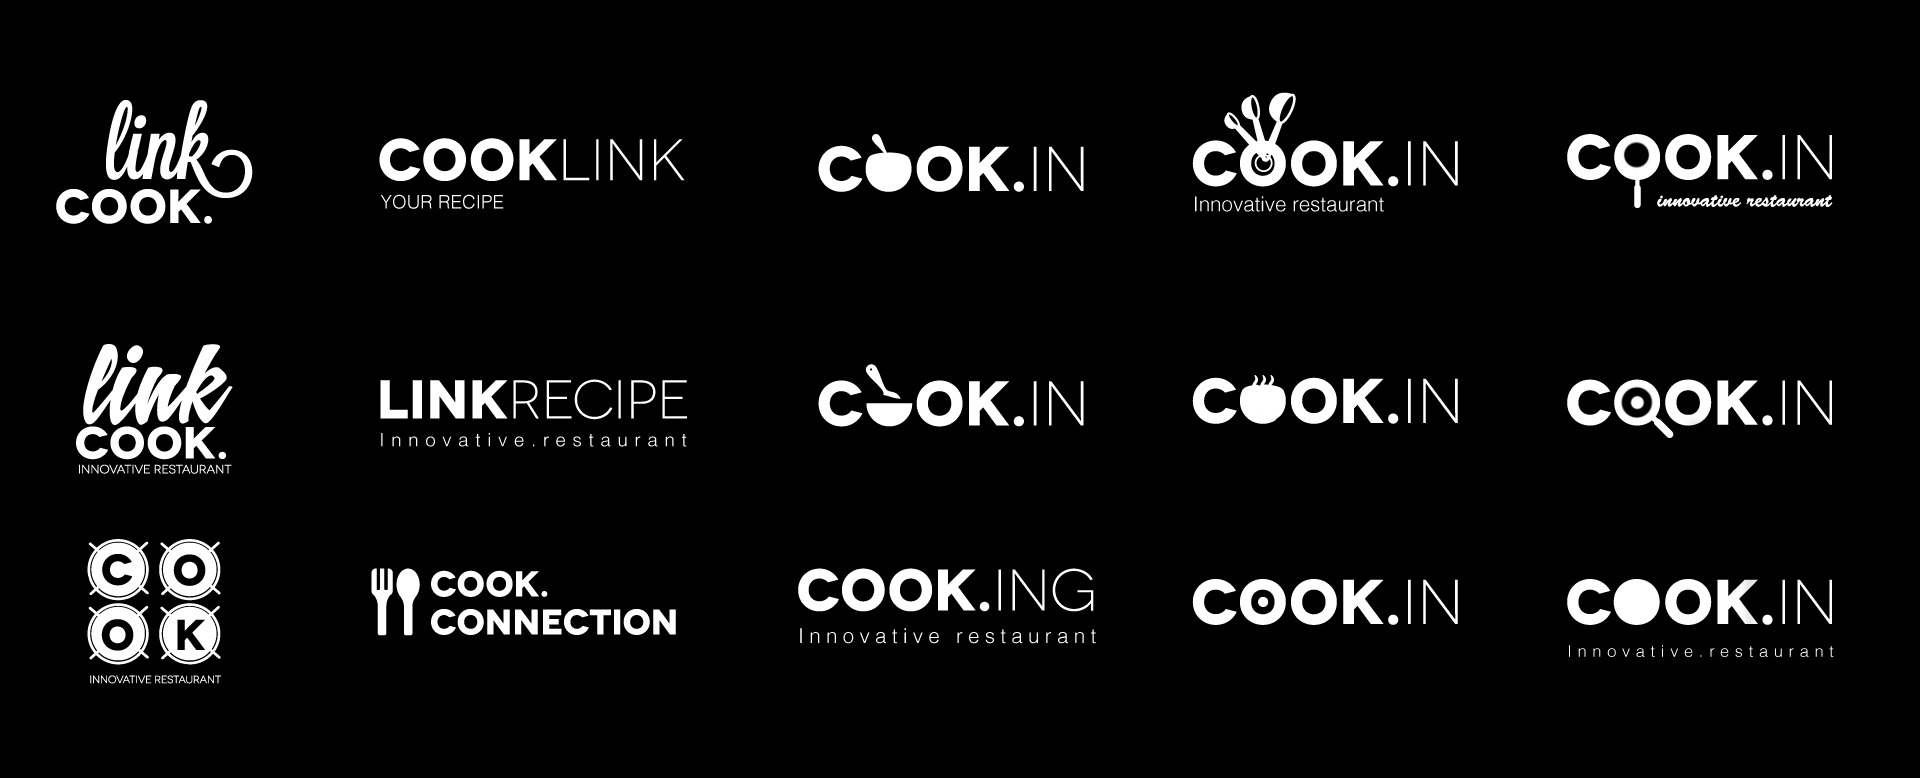 Cook.in